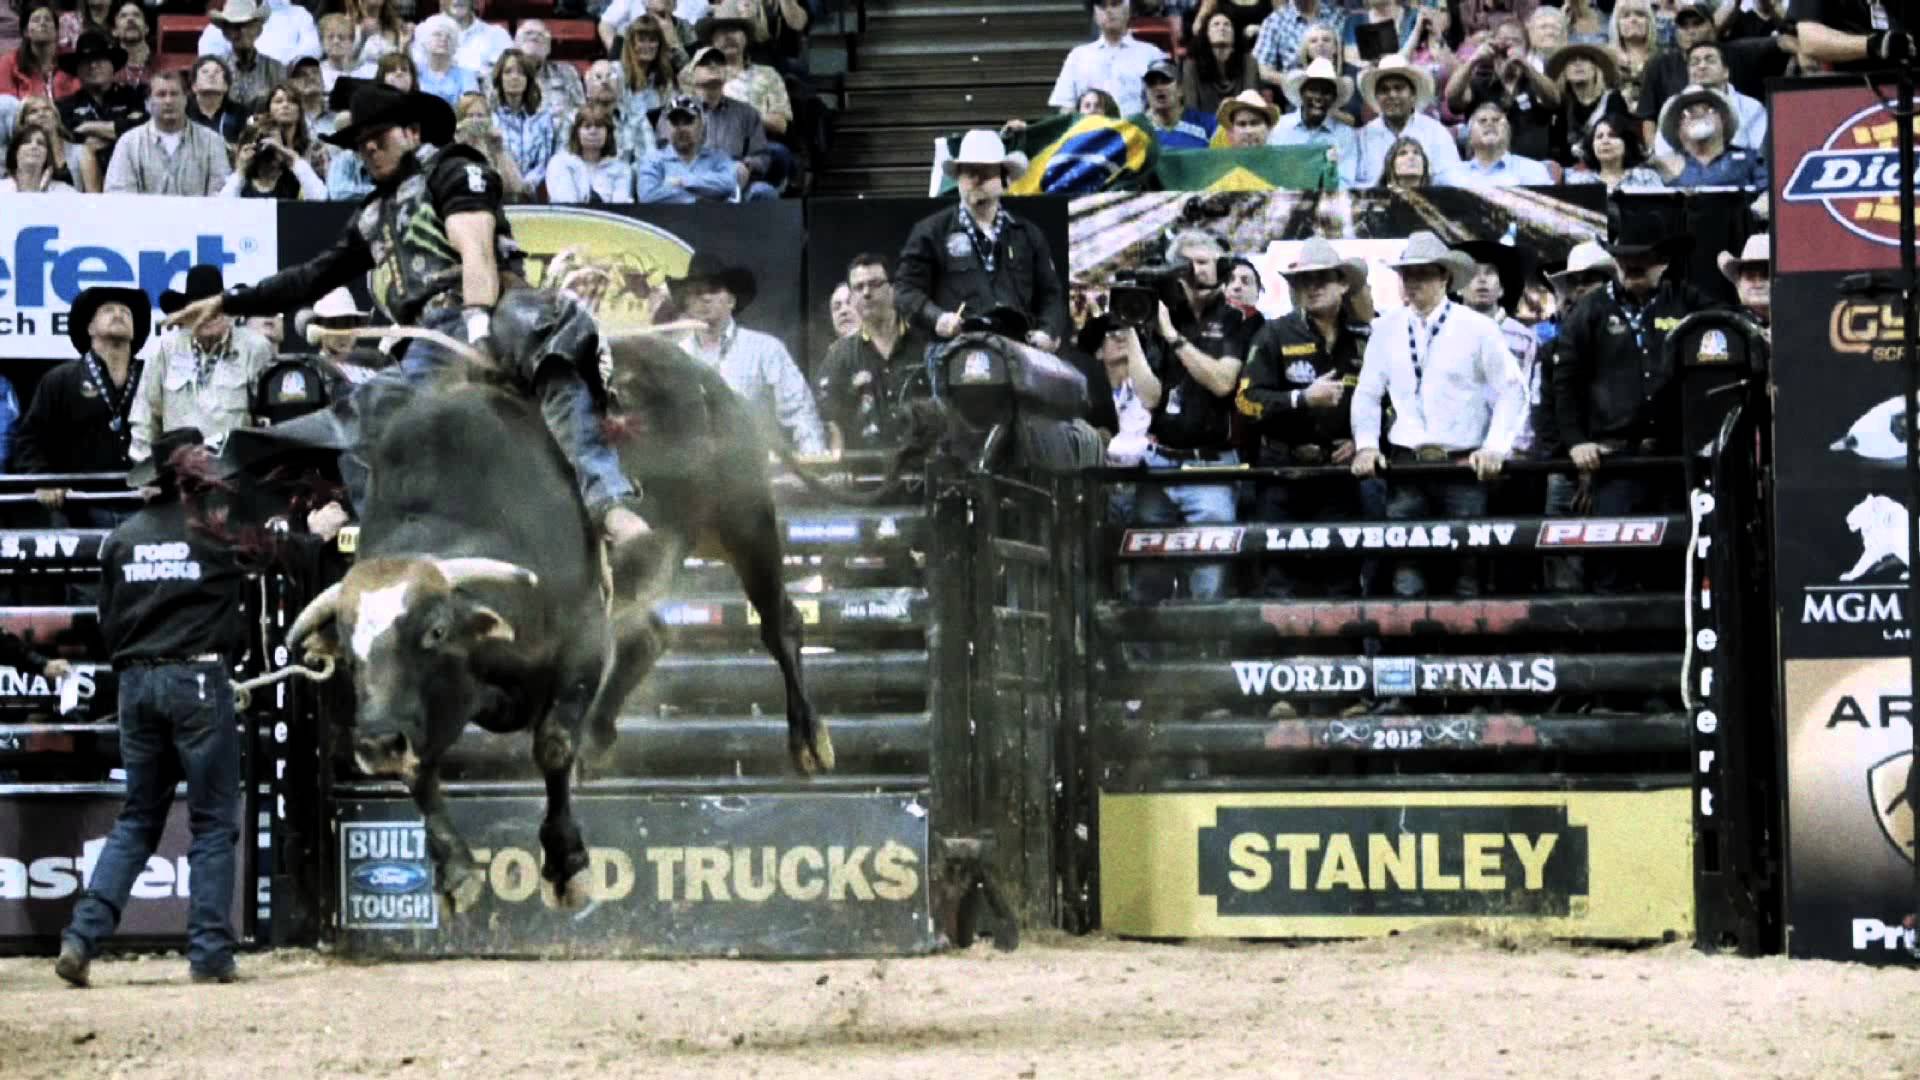 image For > Pbr Bull Riding 2014